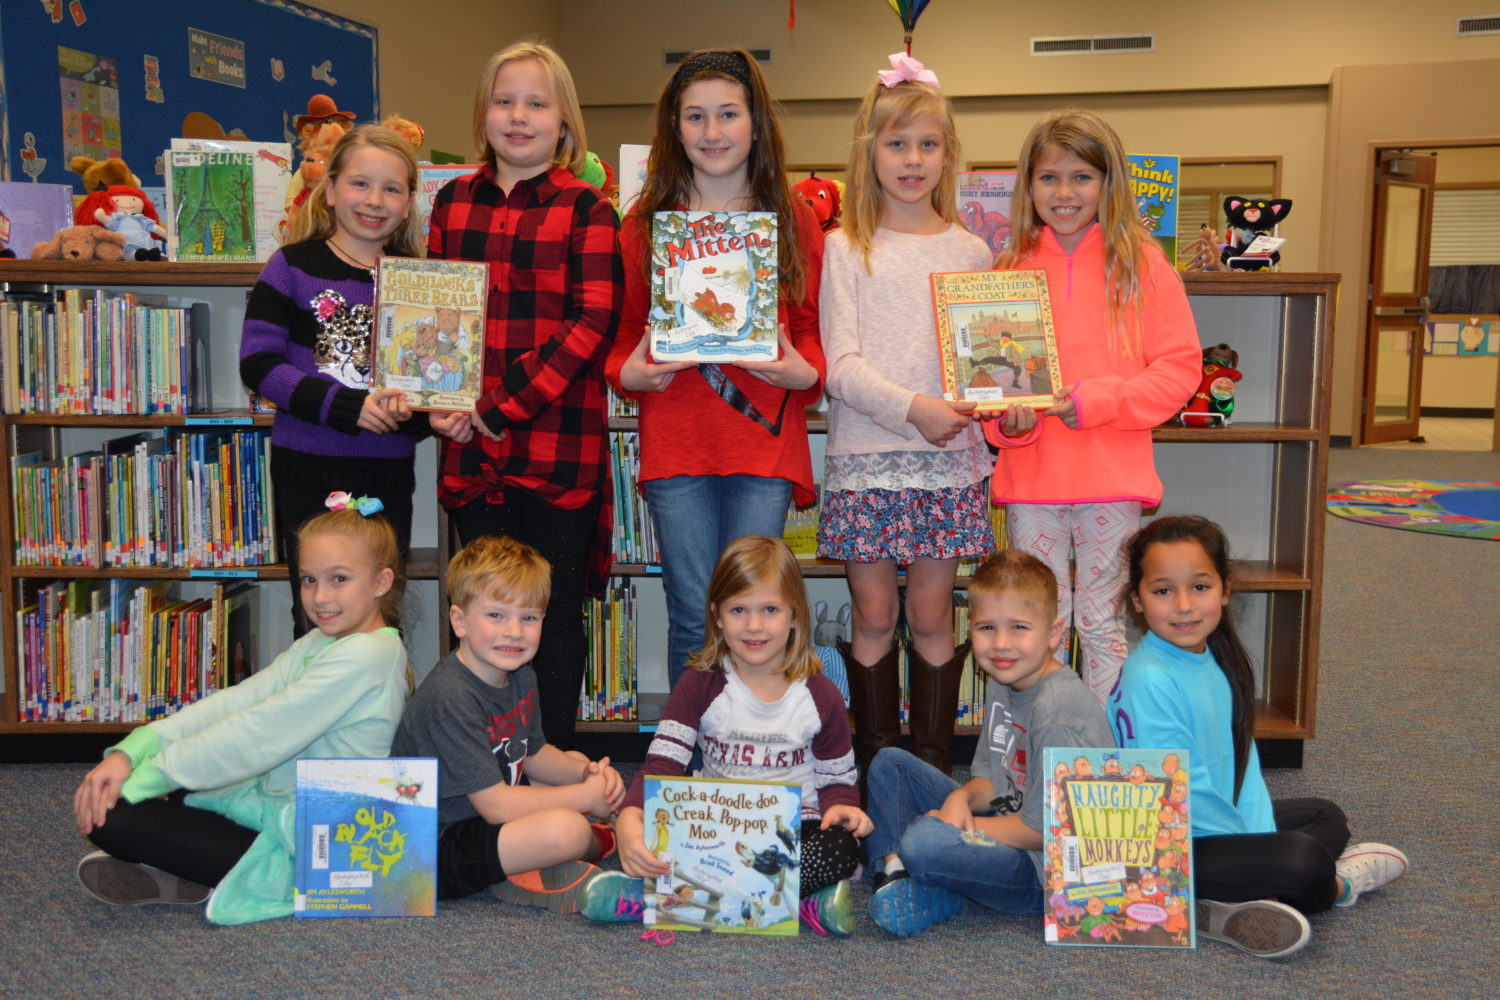 Students from Ride Elementary pose with books donated to the library in honor of our Conroe ISD School Board.